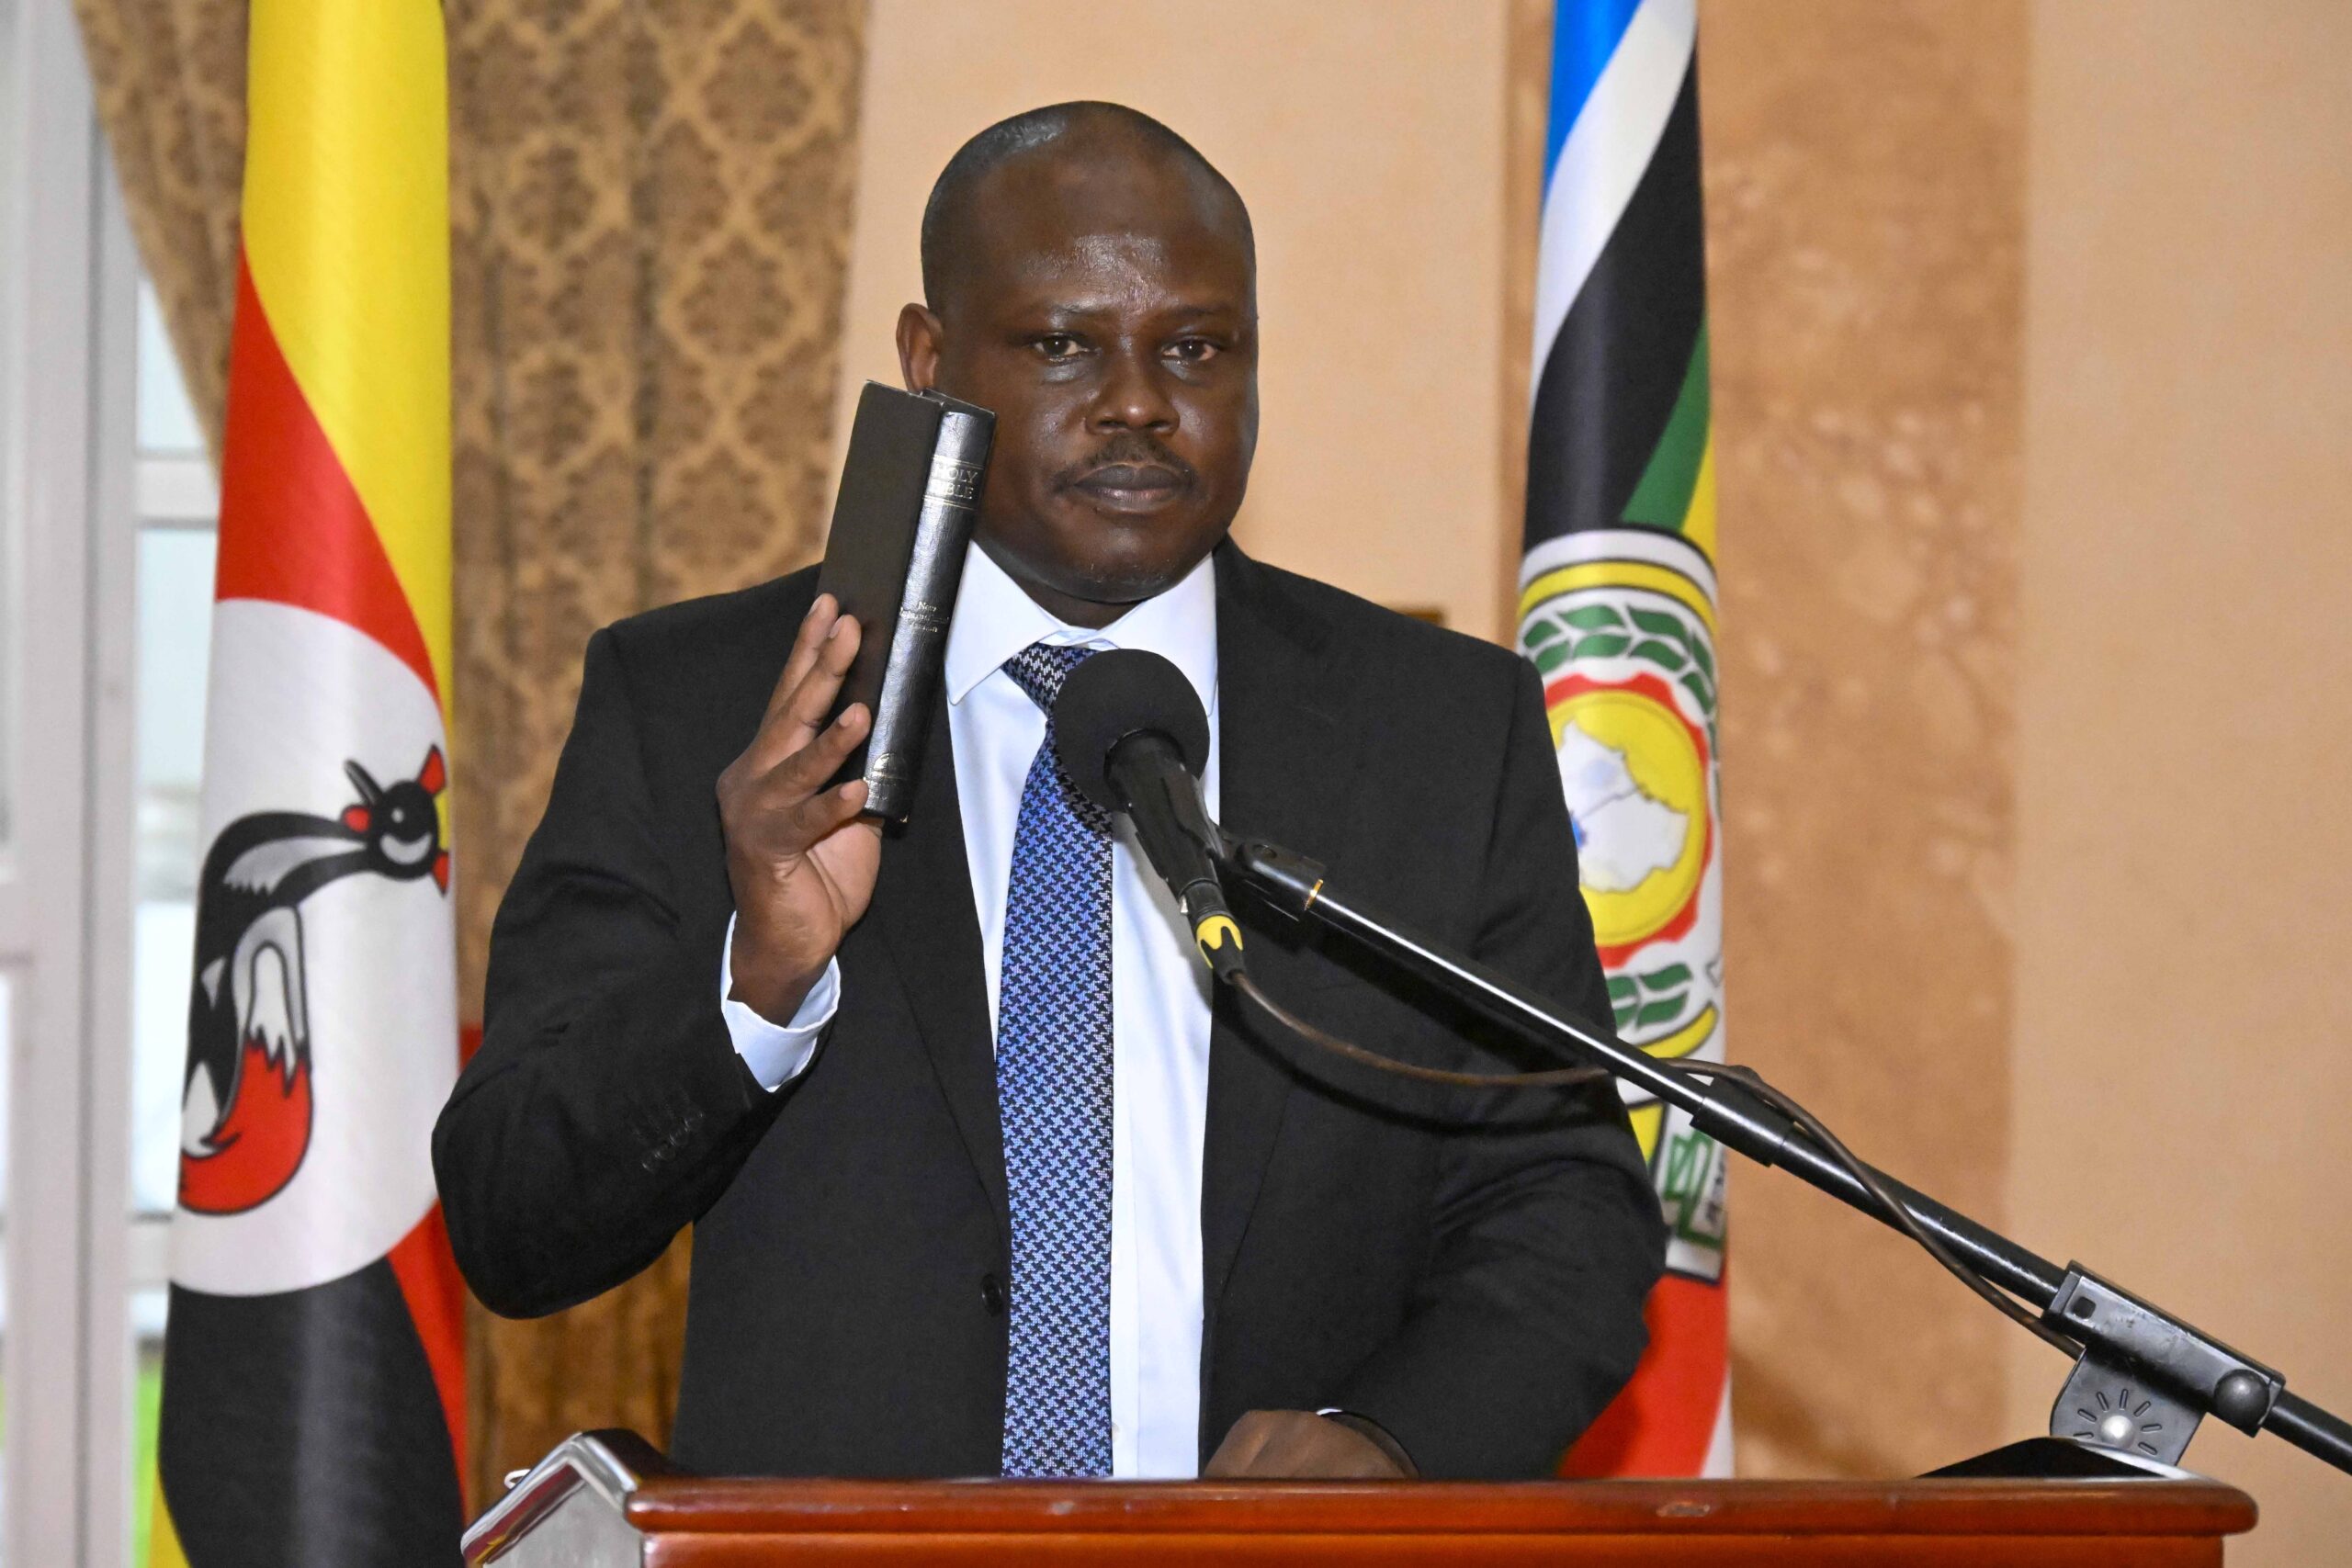 THE PRESIDENT URGES AKOL TO SNIFF FOR UGANDA AS AUDITOR GENERAL.